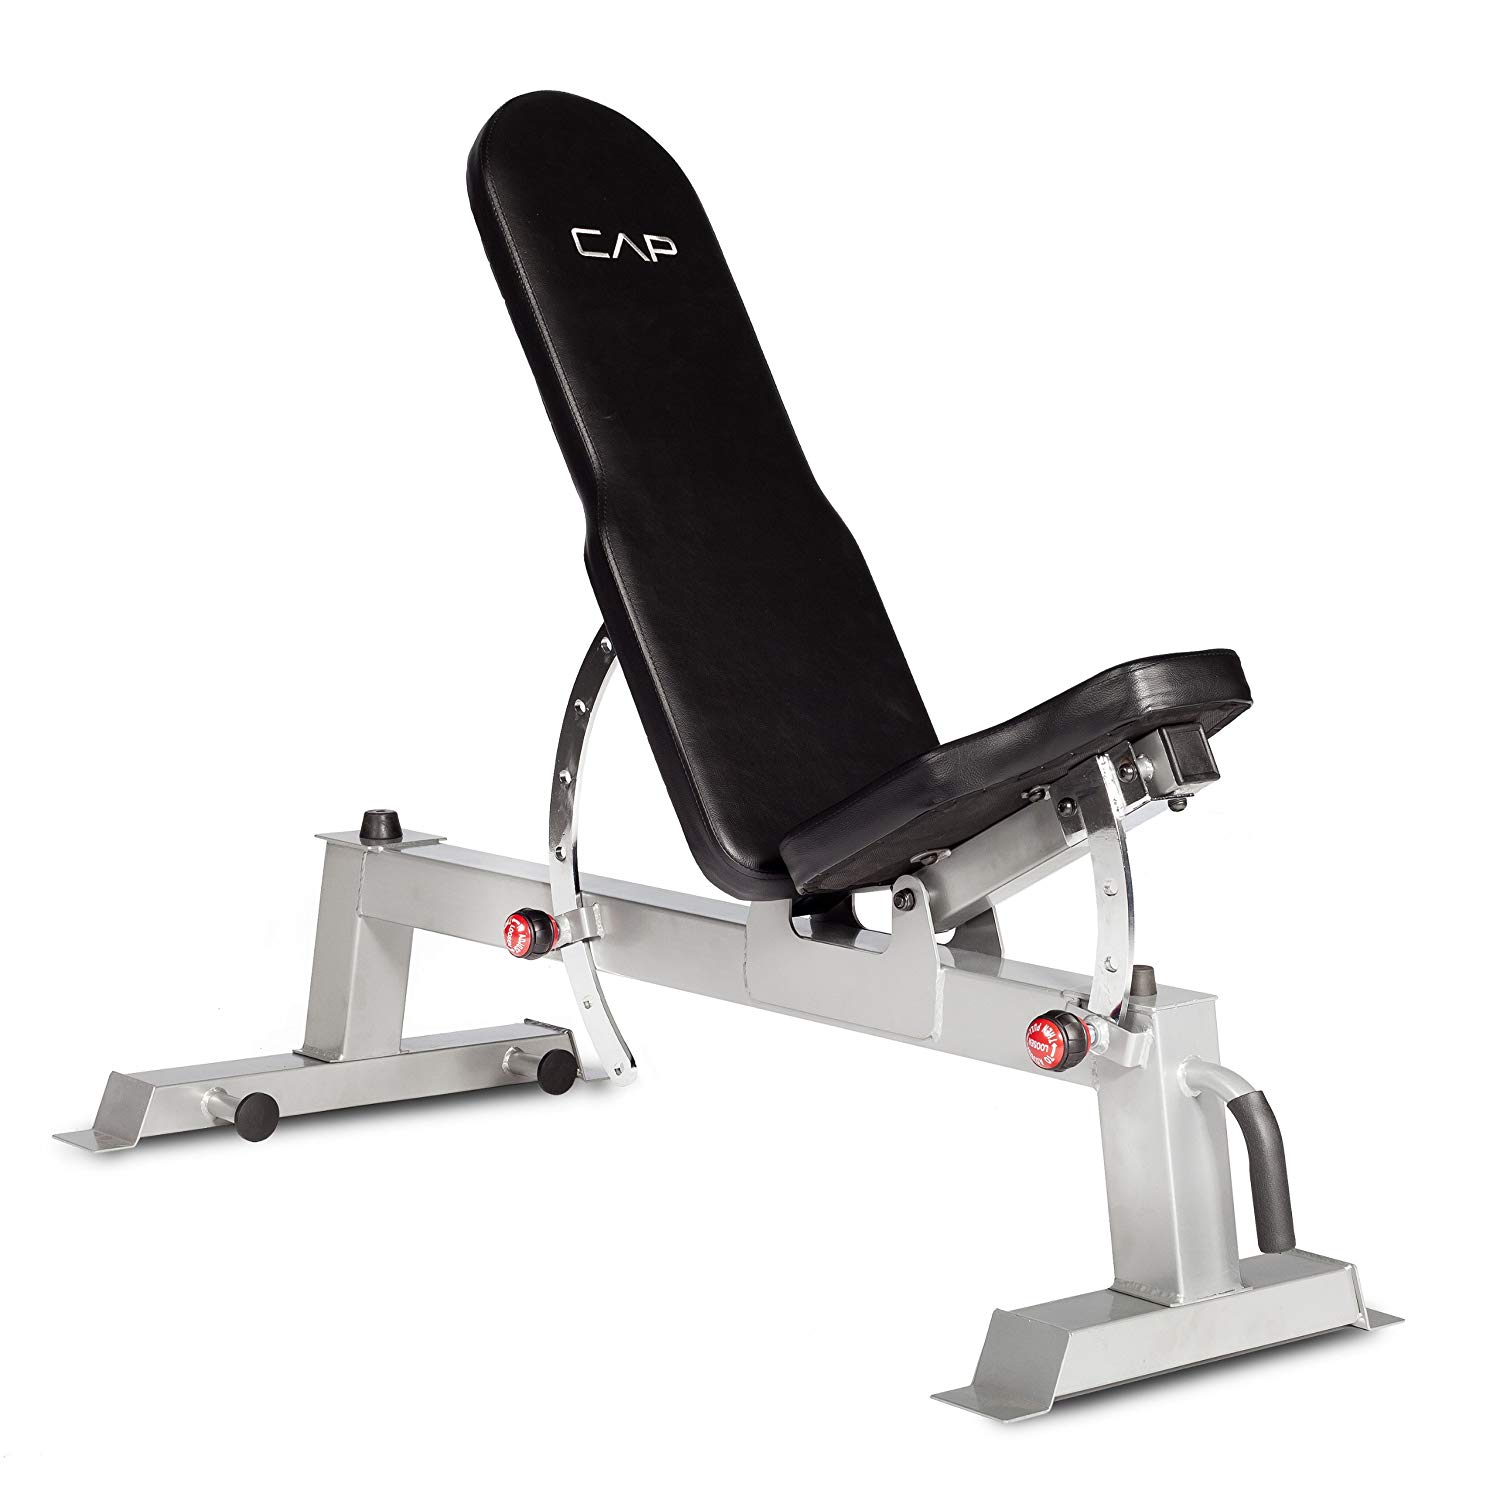 Adjustable Benches  Garage Gym Reviews